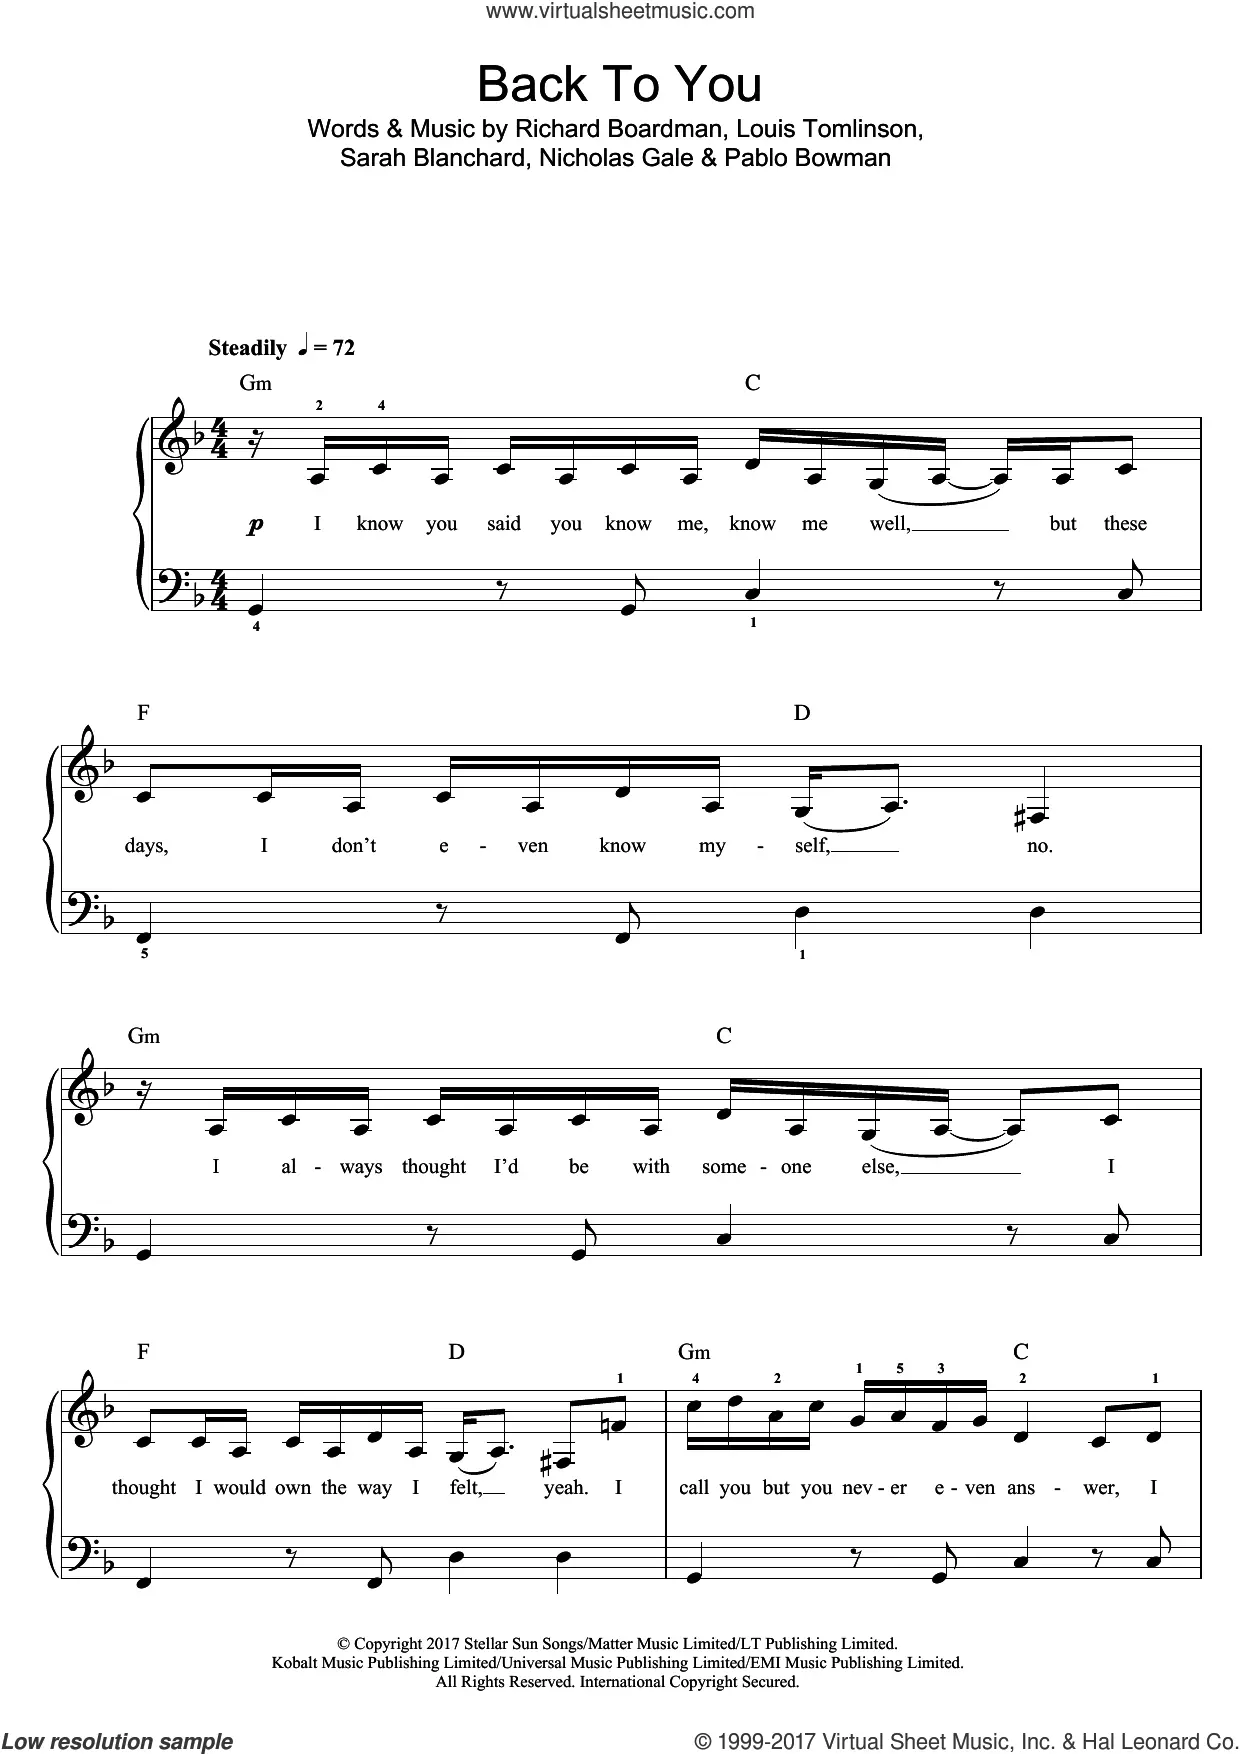 Louis-Tomlinson Sheet Music to download and print